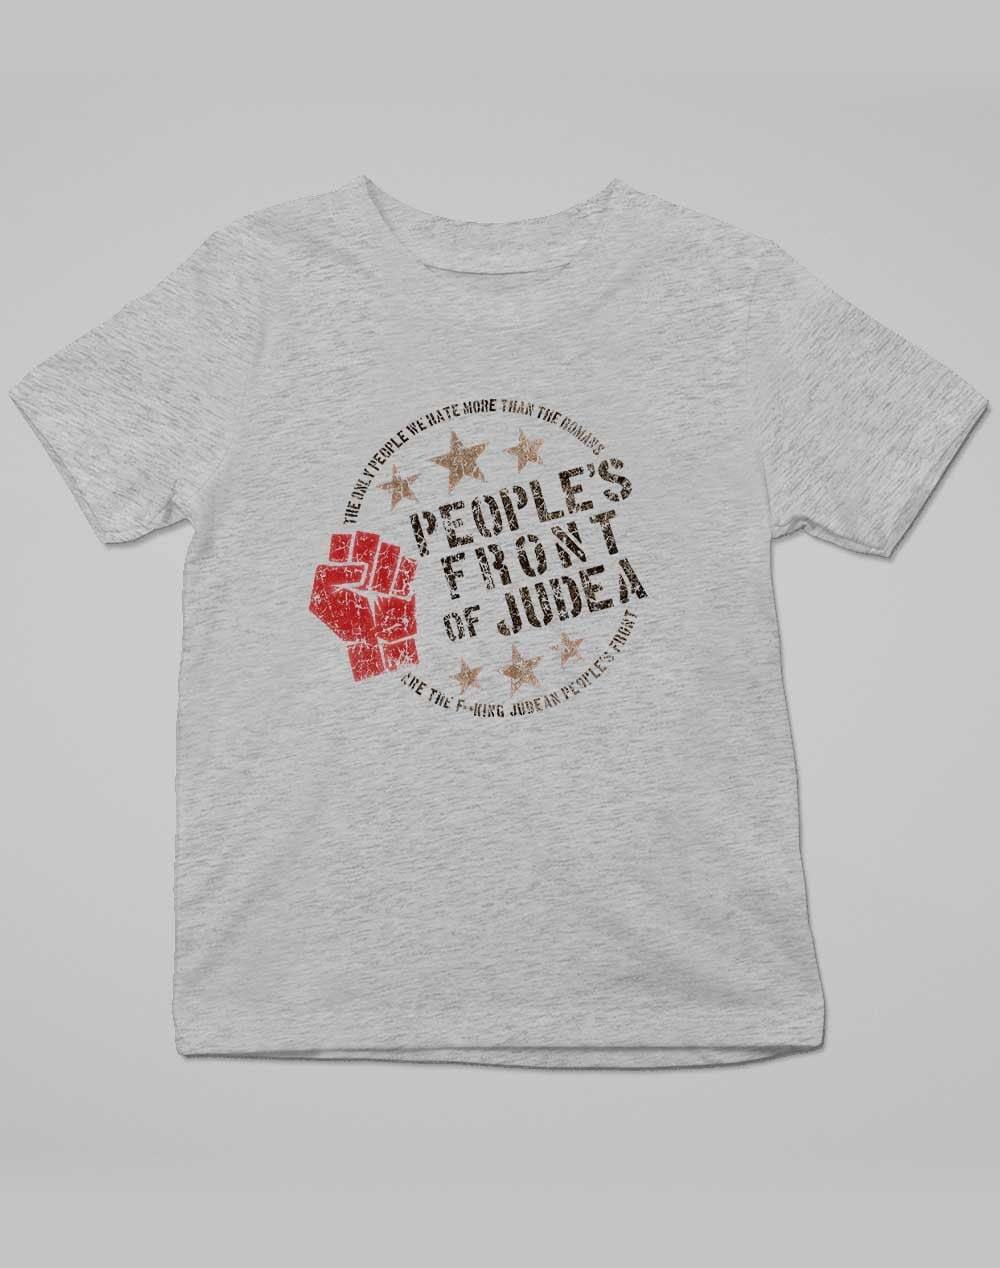 People's Front of Judea Kids T-Shirt 3-4 years / Grey Marl  - Off World Tees